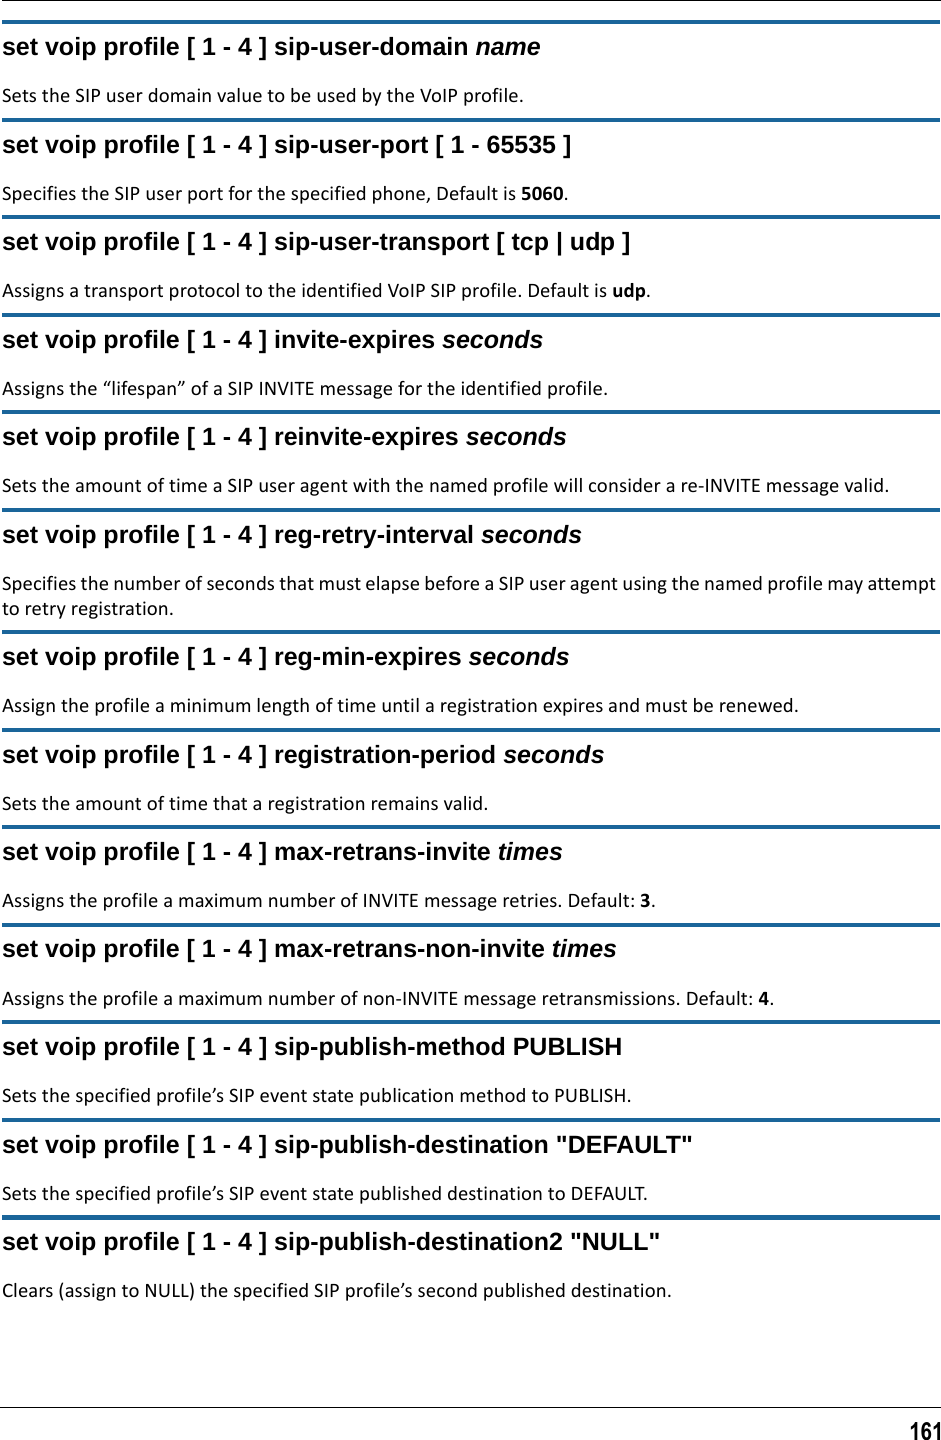 161set voip profile [ 1 - 4 ] sip-user-domain nameSets the SIP user domain value to be used by the VoIP profile.set voip profile [ 1 - 4 ] sip-user-port [ 1 - 65535 ]Specifies the SIP user port for the specified phone, Default is 5060.set voip profile [ 1 - 4 ] sip-user-transport [ tcp | udp ]Assigns a transport protocol to the identified VoIP SIP profile. Default is udp.set voip profile [ 1 - 4 ] invite-expires secondsAssigns the “lifespan” of a SIP INVITE message for the identified profile. set voip profile [ 1 - 4 ] reinvite-expires secondsSets the amount of time a SIP user agent with the named profile will consider a re-INVITE message valid.set voip profile [ 1 - 4 ] reg-retry-interval secondsSpecifies the number of seconds that must elapse before a SIP user agent using the named profile may attempt to retry registration.set voip profile [ 1 - 4 ] reg-min-expires secondsAssign the profile a minimum length of time until a registration expires and must be renewed.set voip profile [ 1 - 4 ] registration-period secondsSets the amount of time that a registration remains valid.set voip profile [ 1 - 4 ] max-retrans-invite timesAssigns the profile a maximum number of INVITE message retries. Default: 3.set voip profile [ 1 - 4 ] max-retrans-non-invite timesAssigns the profile a maximum number of non-INVITE message retransmissions. Default: 4.set voip profile [ 1 - 4 ] sip-publish-method PUBLISHSets the specified profile’s SIP event state publication method to PUBLISH.set voip profile [ 1 - 4 ] sip-publish-destination &quot;DEFAULT&quot;Sets the specified profile’s SIP event state published destination to DEFAULT.set voip profile [ 1 - 4 ] sip-publish-destination2 &quot;NULL&quot;Clears (assign to NULL) the specified SIP profile’s second published destination.